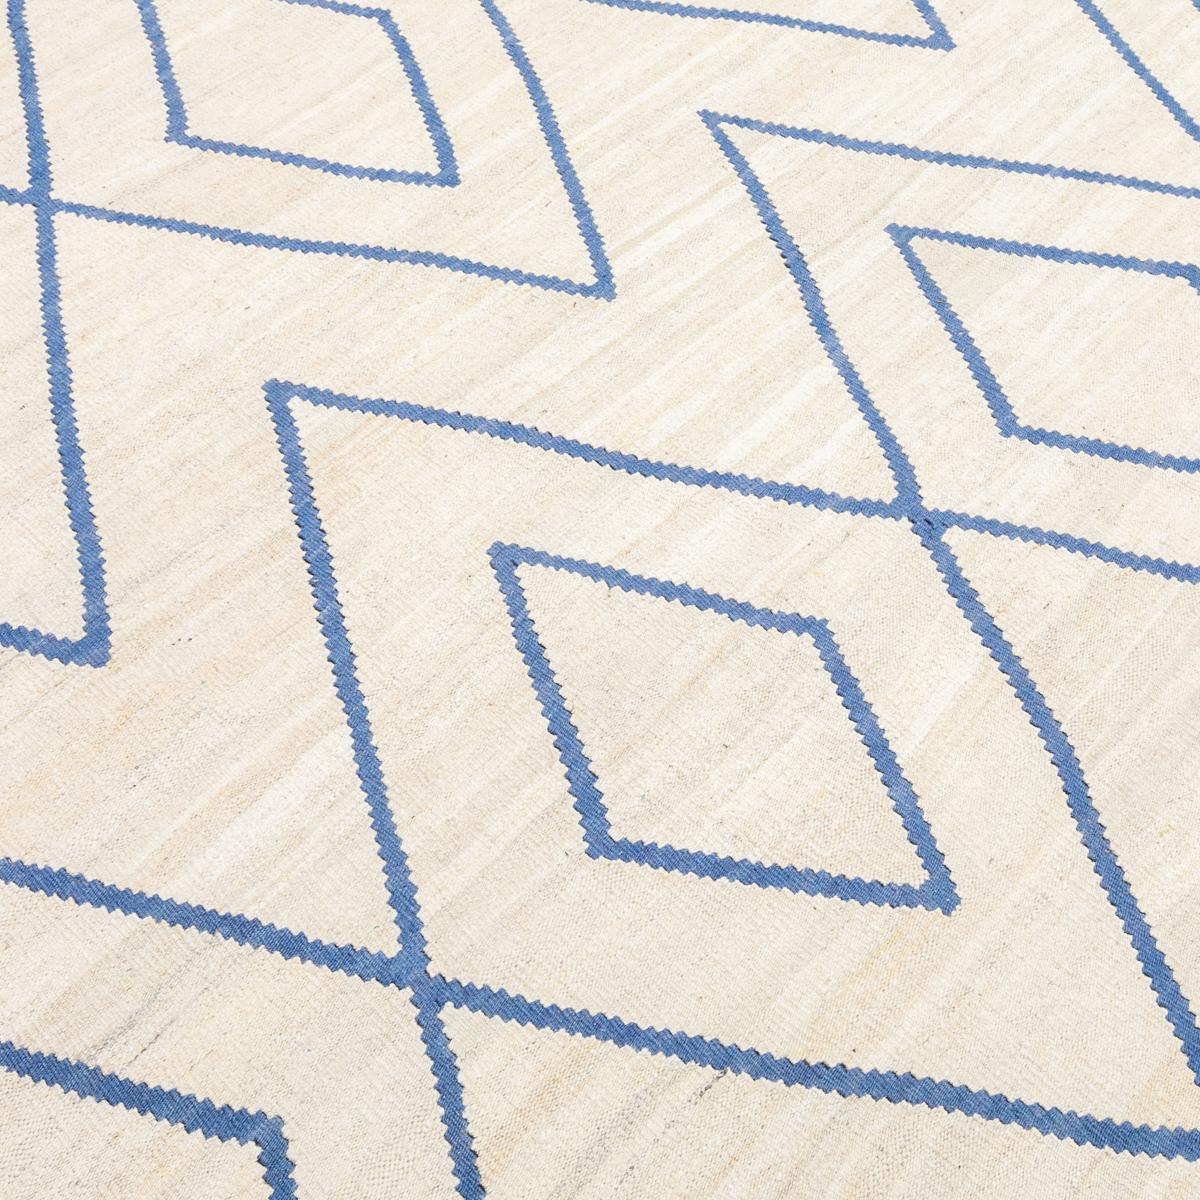 Wool Contemporary Kilim, Rombus Design over Beige and Blue Colors.